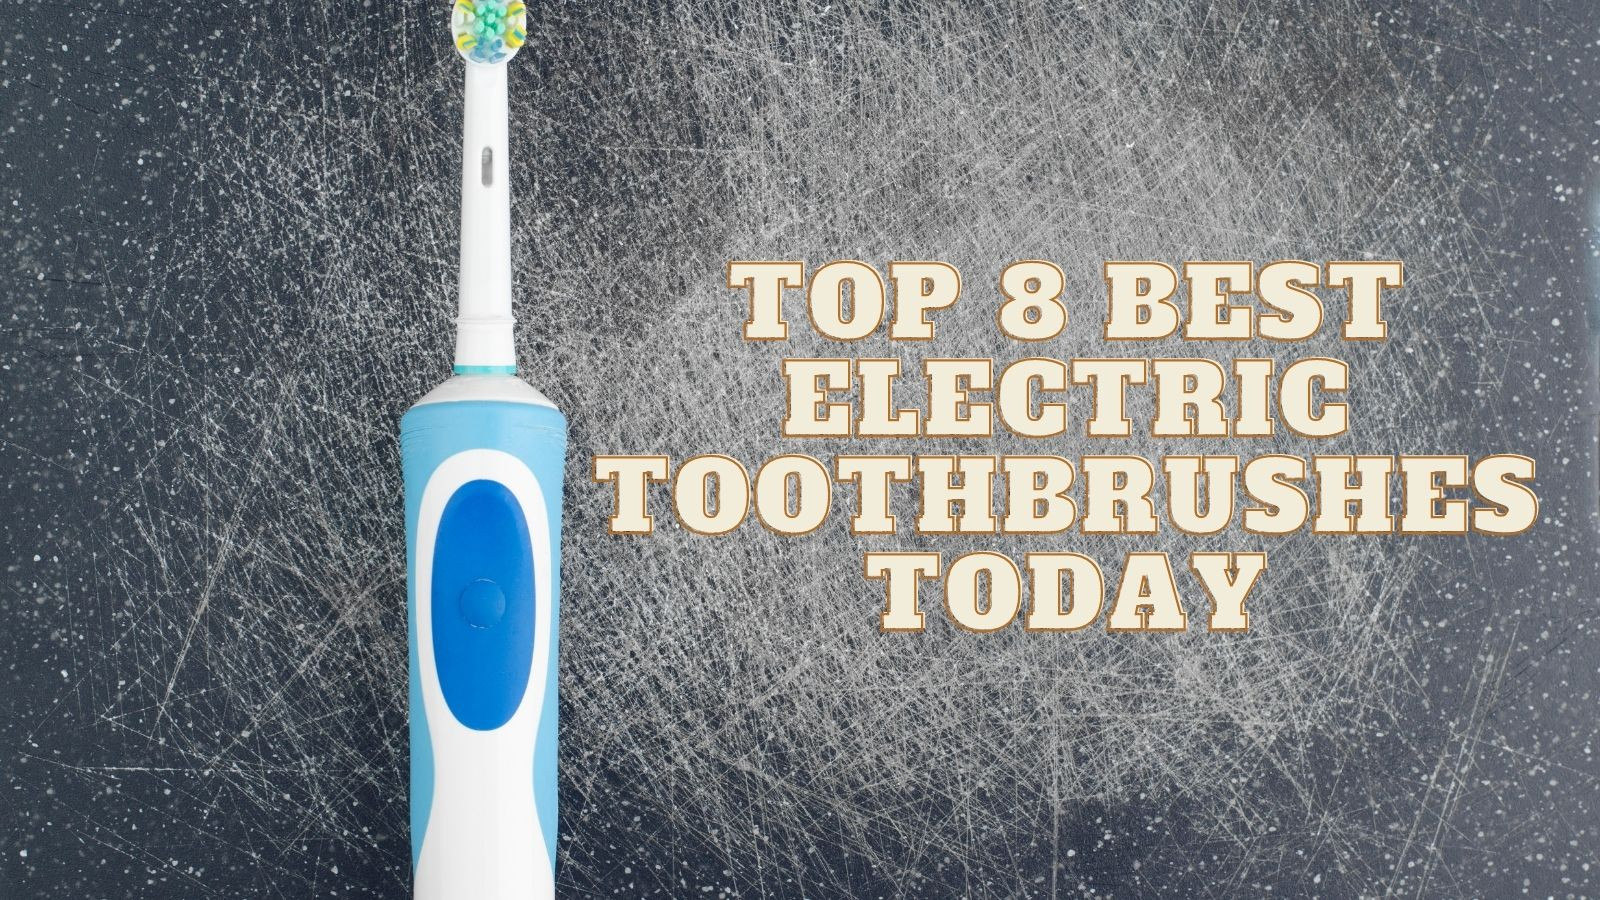 Top 8 Best Electric Toothbrushes Today